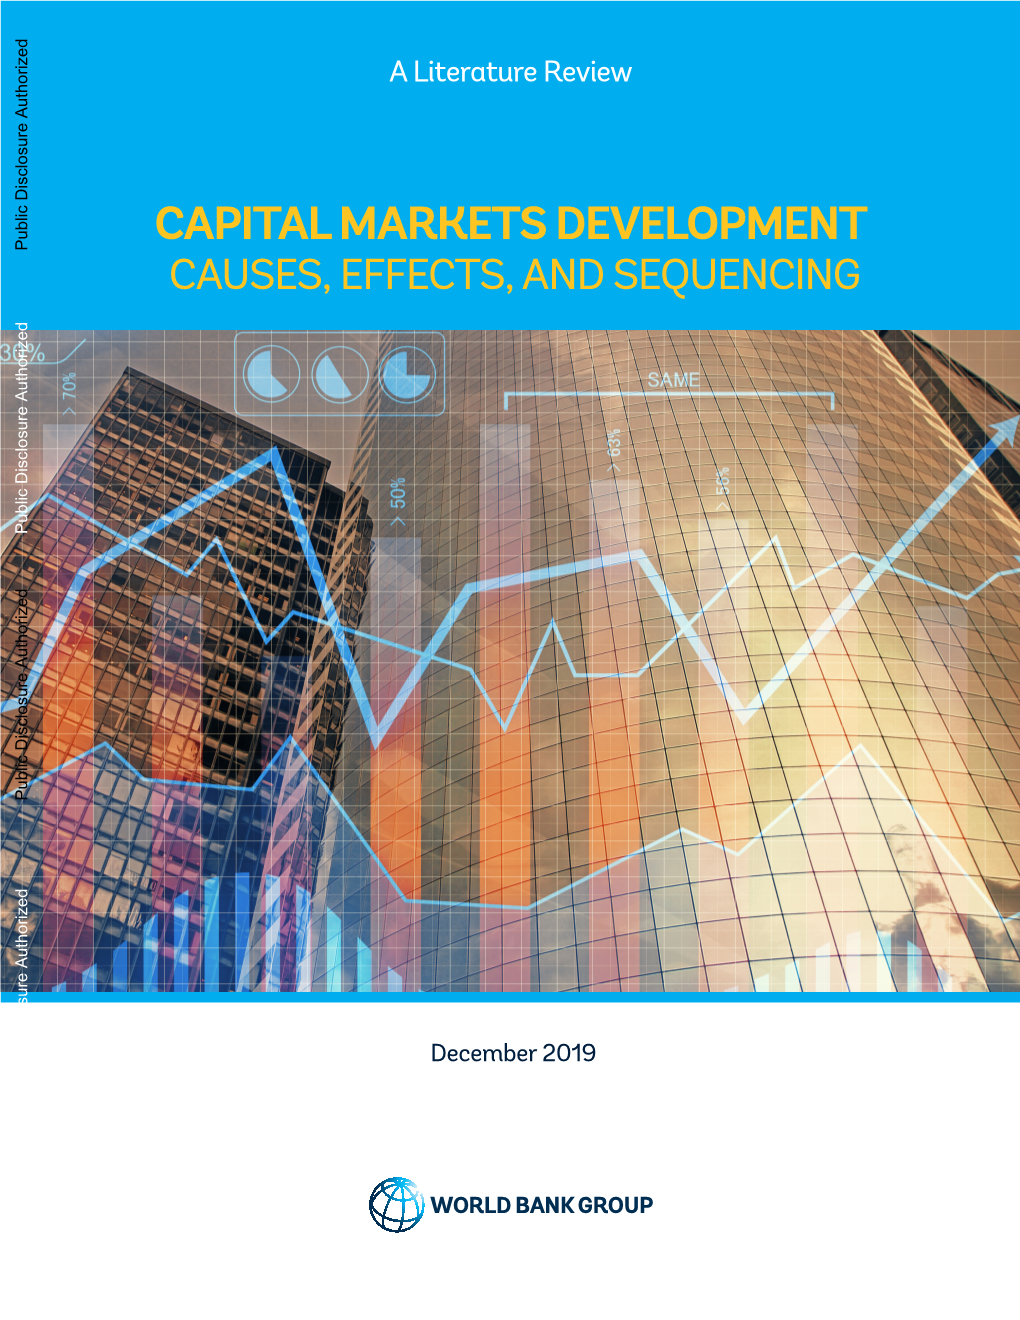 Capital Markets Development: Causes, Effects and Sequencing